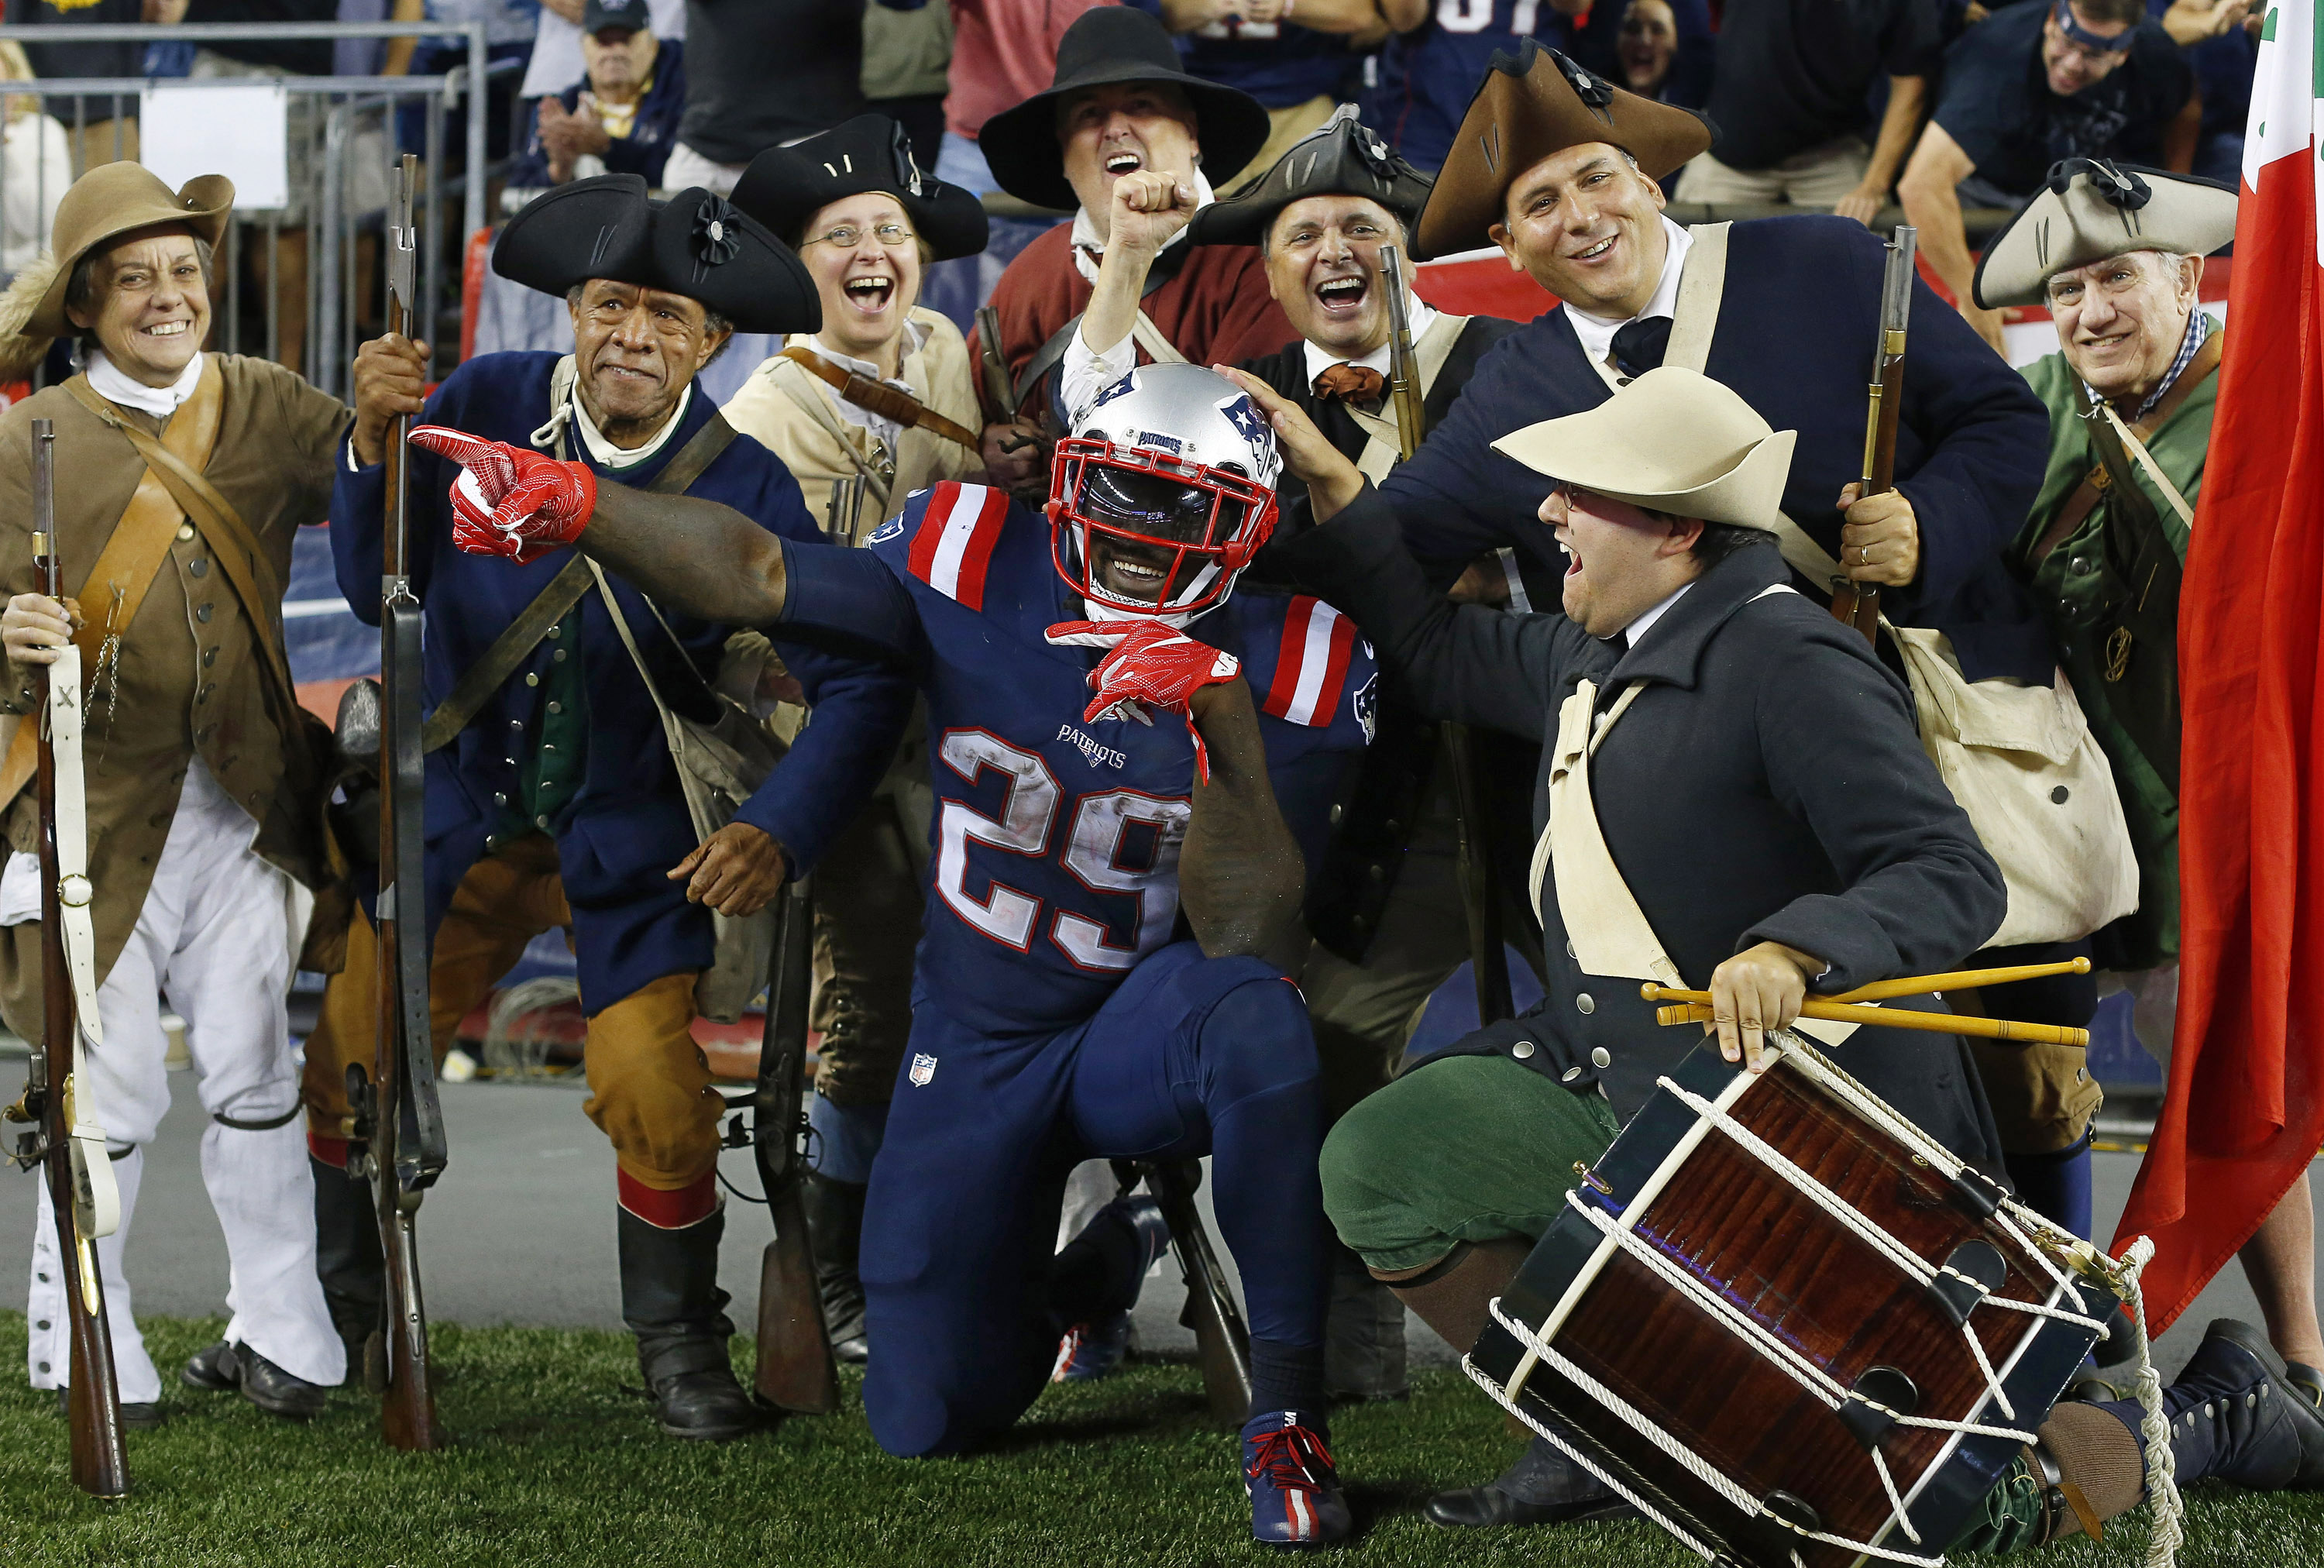 The New England Patriots' LeGarrette Blount celebrates a touchdown against the Houston Texans with the End Zone Militia at Gillette Stadium in Foxborough, Massachusetts, on Sept. 22. | WINSLOW TOWNSON / USA TODAY SPORTS / REUTERS